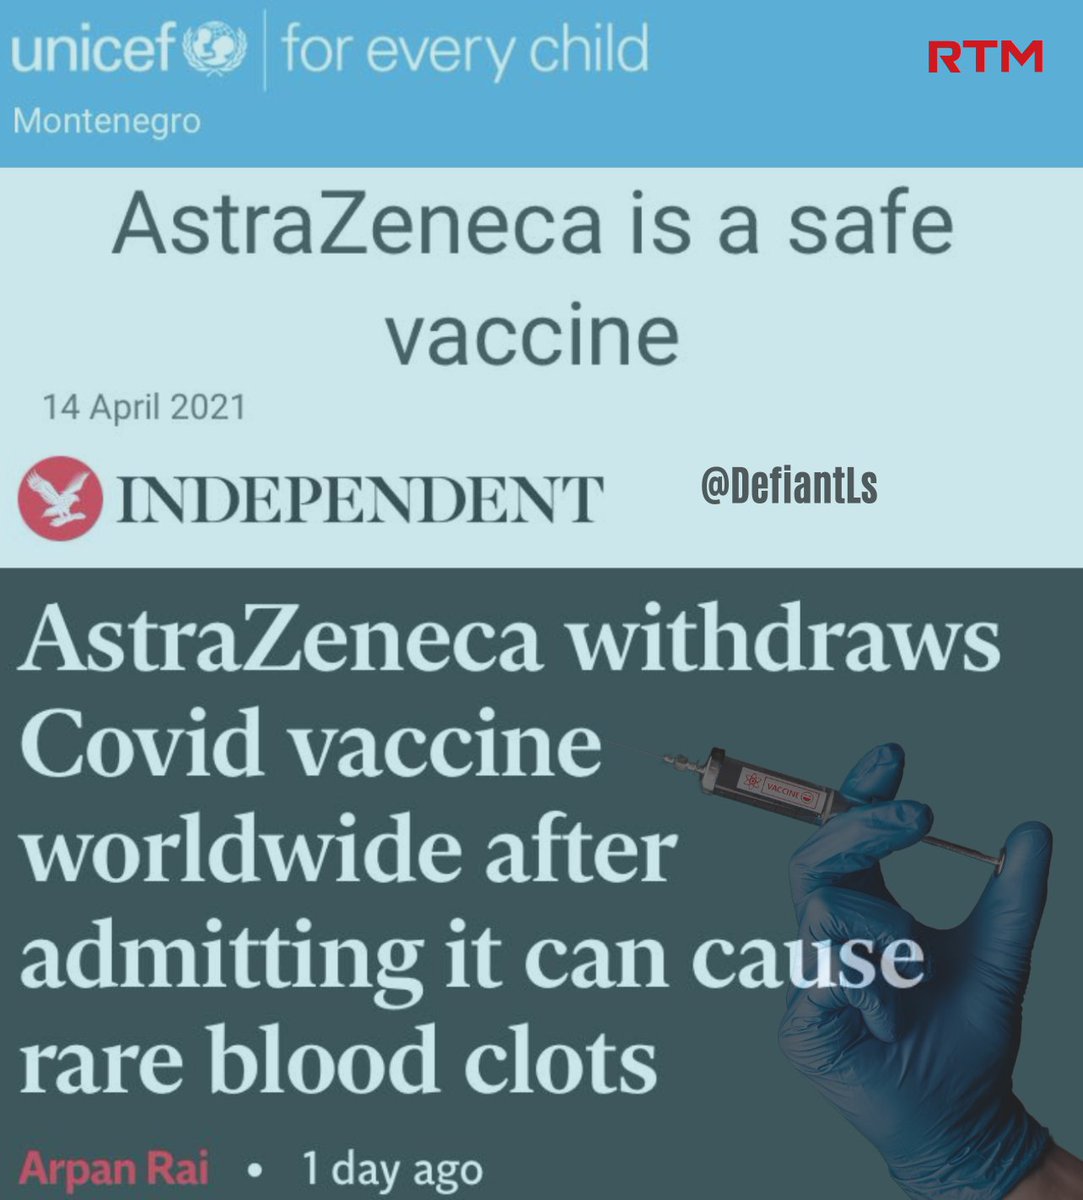 ____ is safer than AstraZeneca. Fill in the blank.